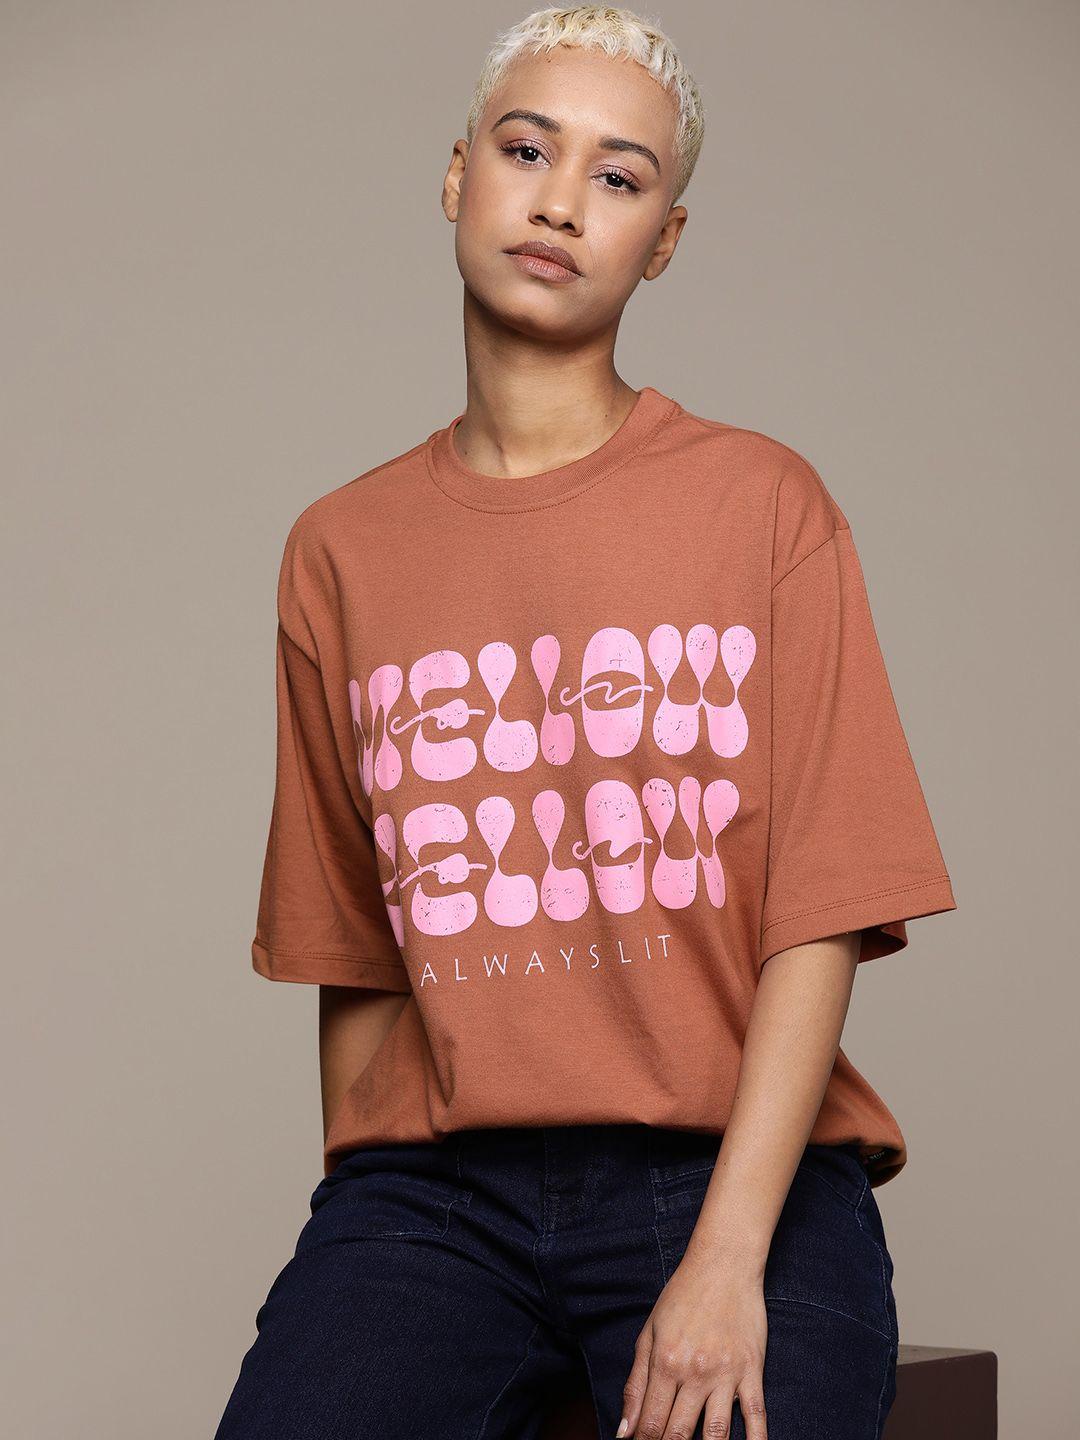 the-roadster-lifestyle-co.-printed-oversized-t-shirt